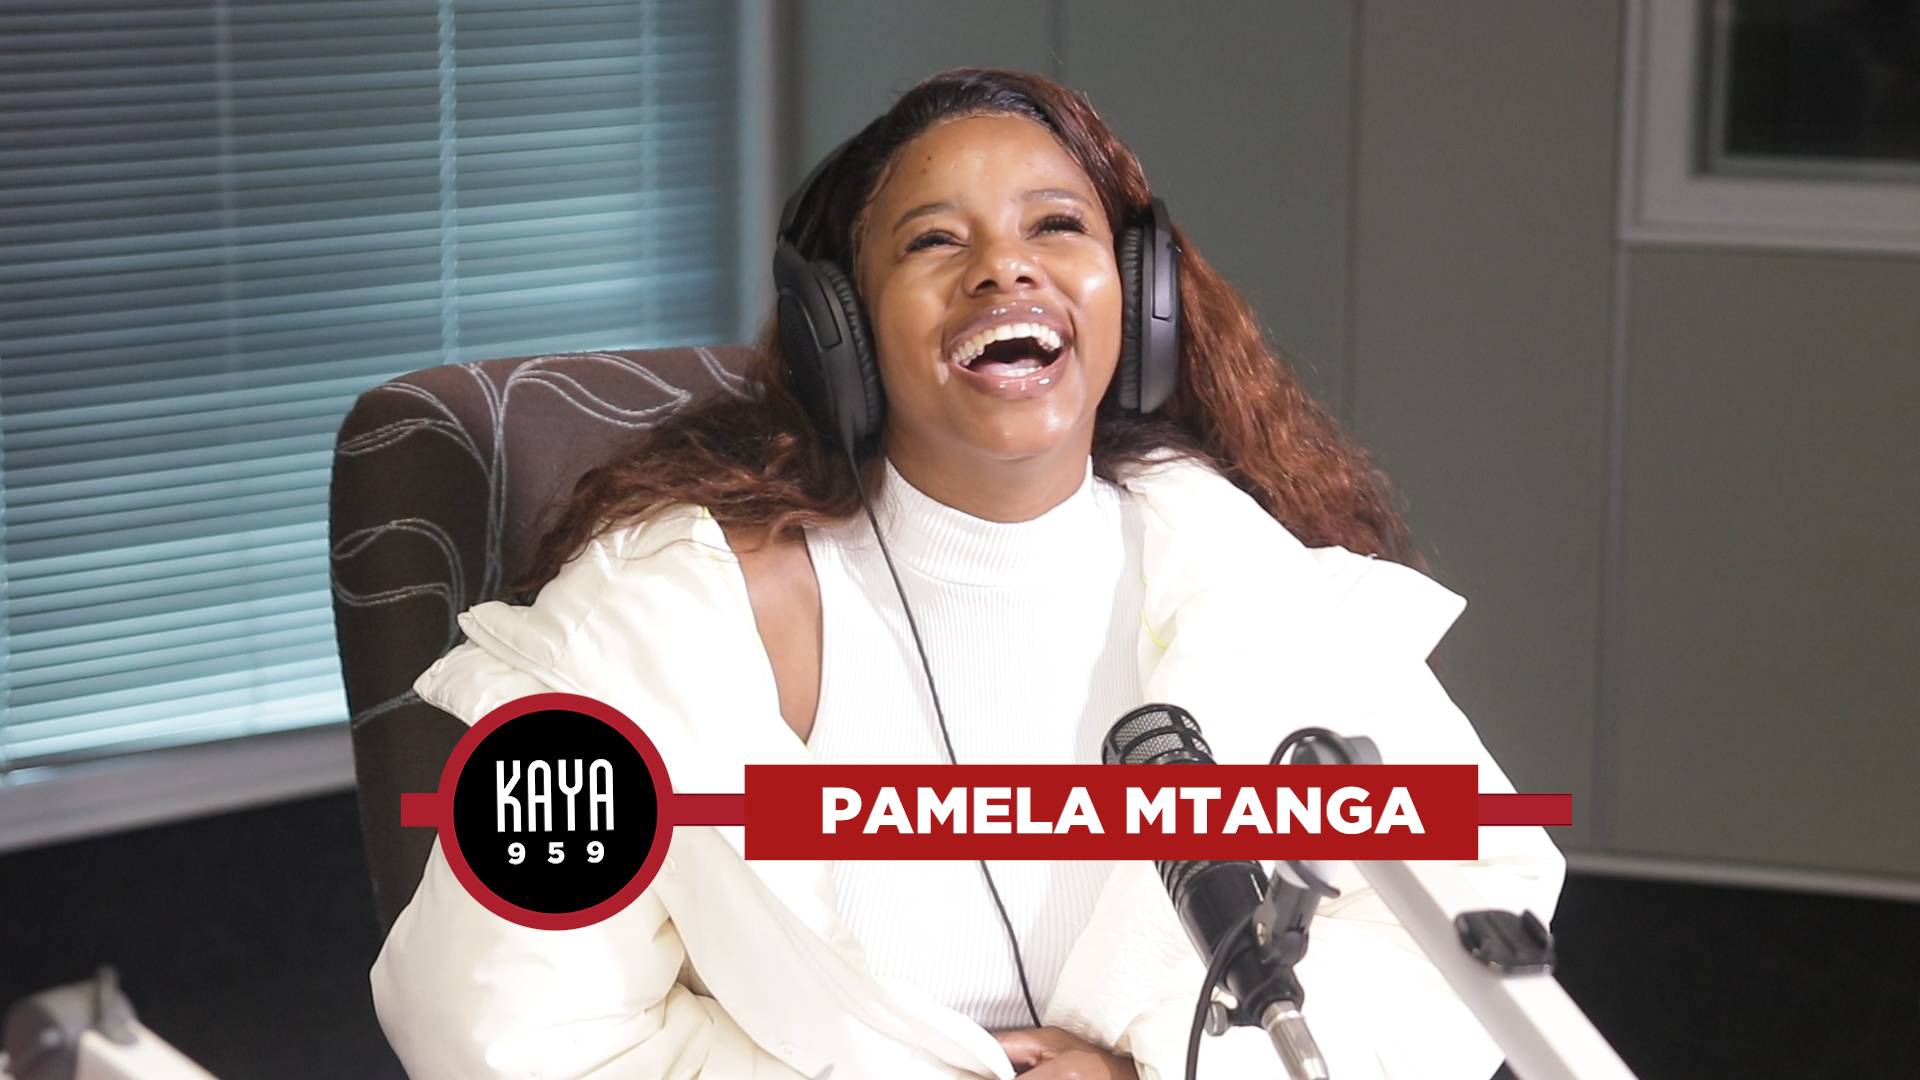 WATCH: Pamela Mtanga talks about her rates and influencer career on 959 Breakfast with Dineo and Sol